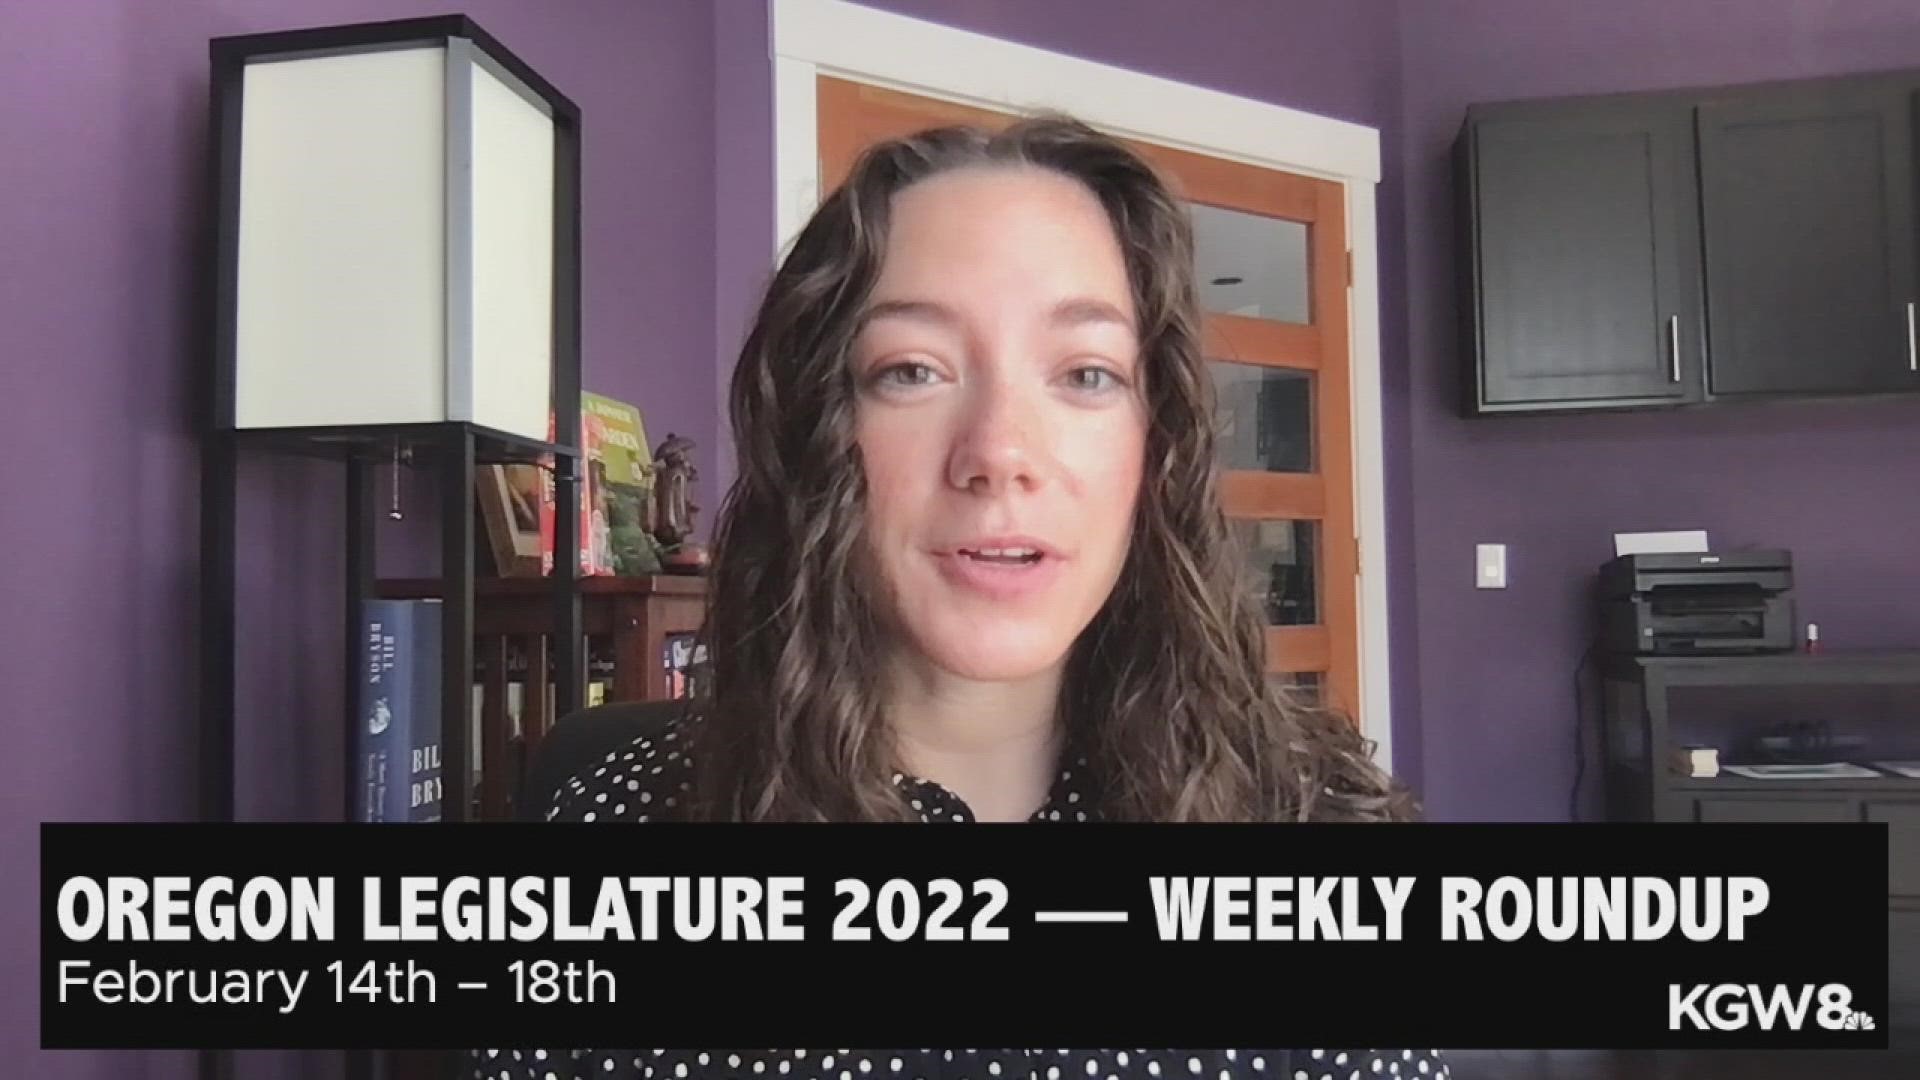 This week, many bills cleared their first chamber vote, with legislation related to voting rights, housing, worker compensation and wildfires moving forward.